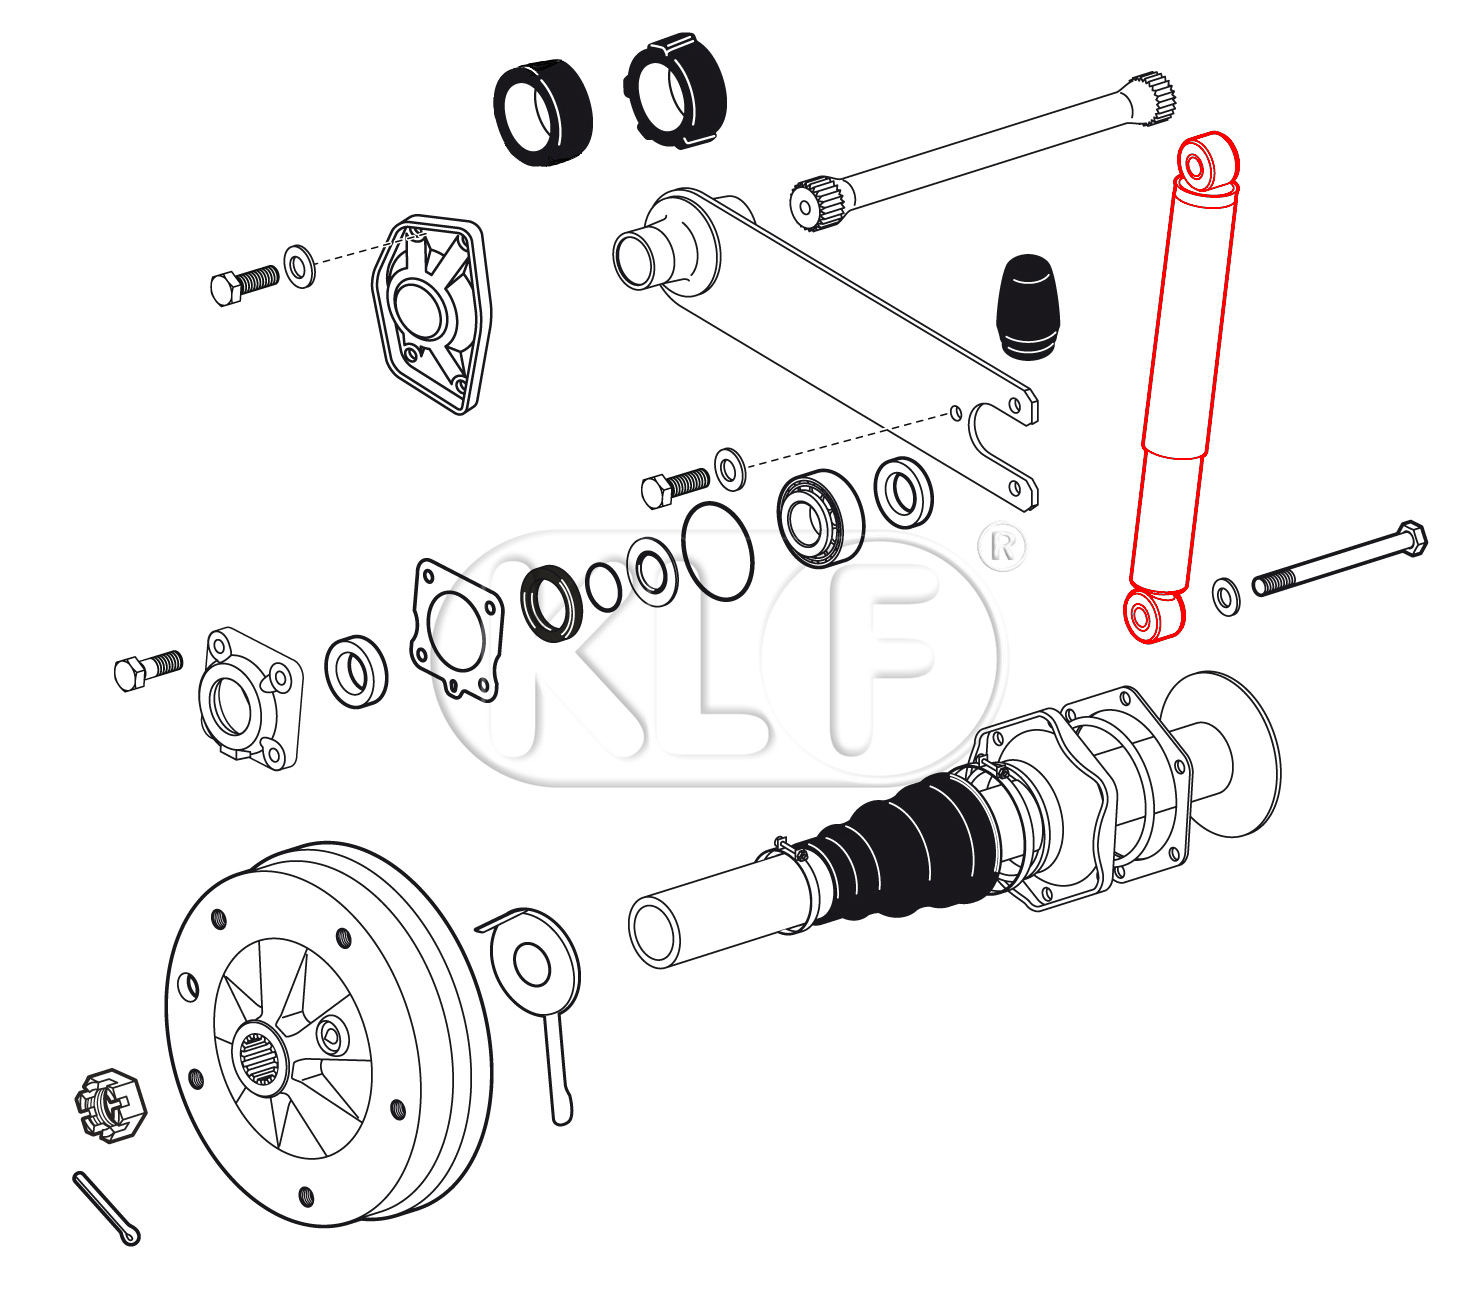 Shock Absorber front / rear, year 50-10/52